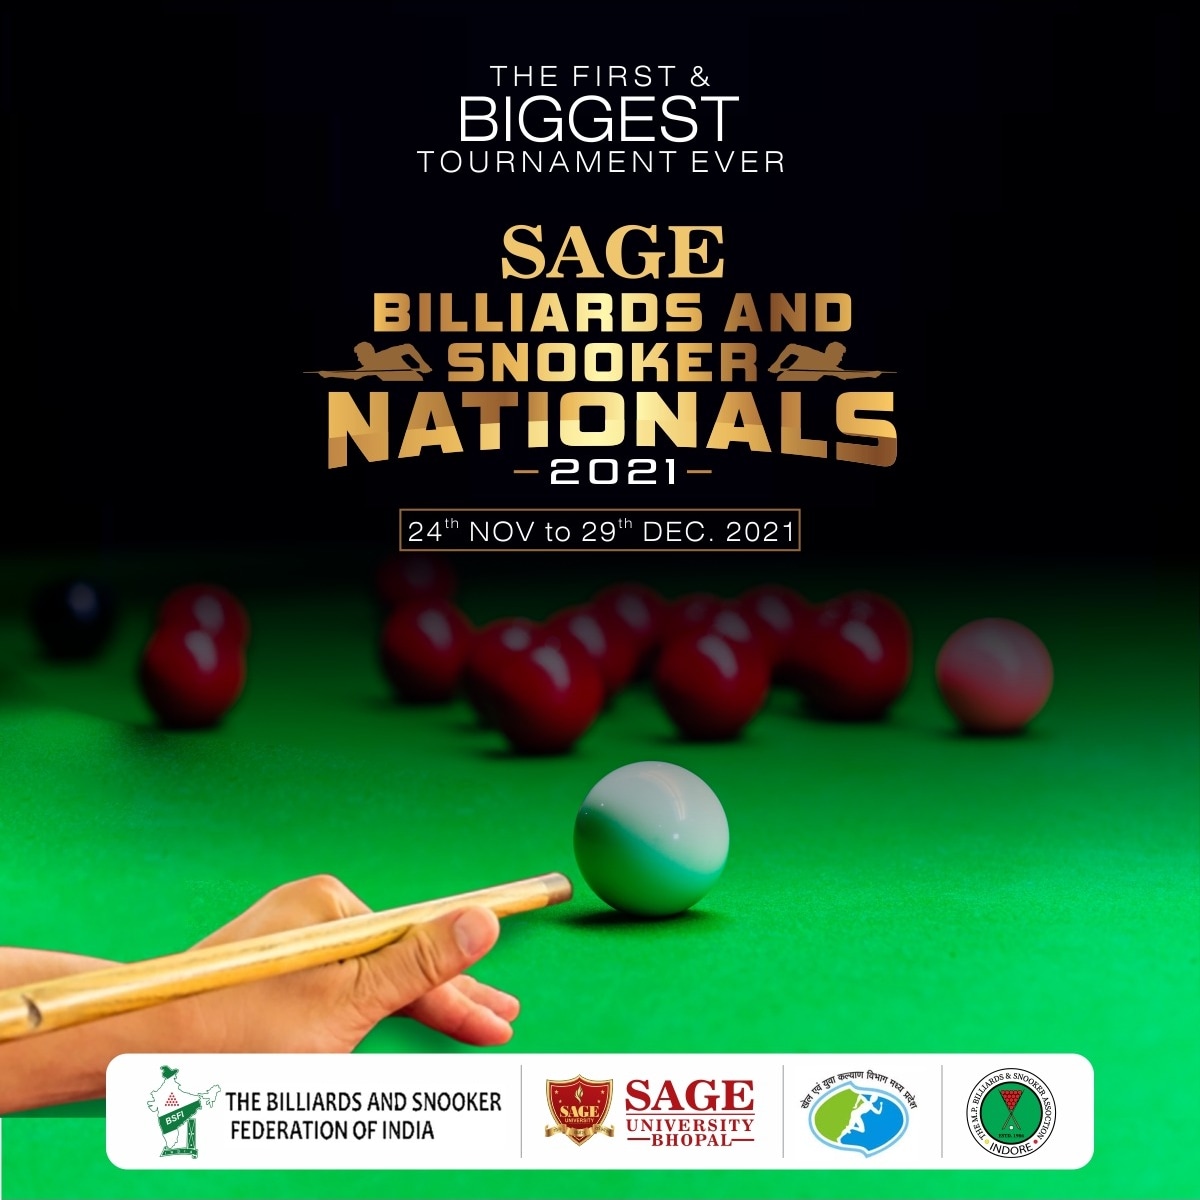 National Billiards and Snooker Championship 2021